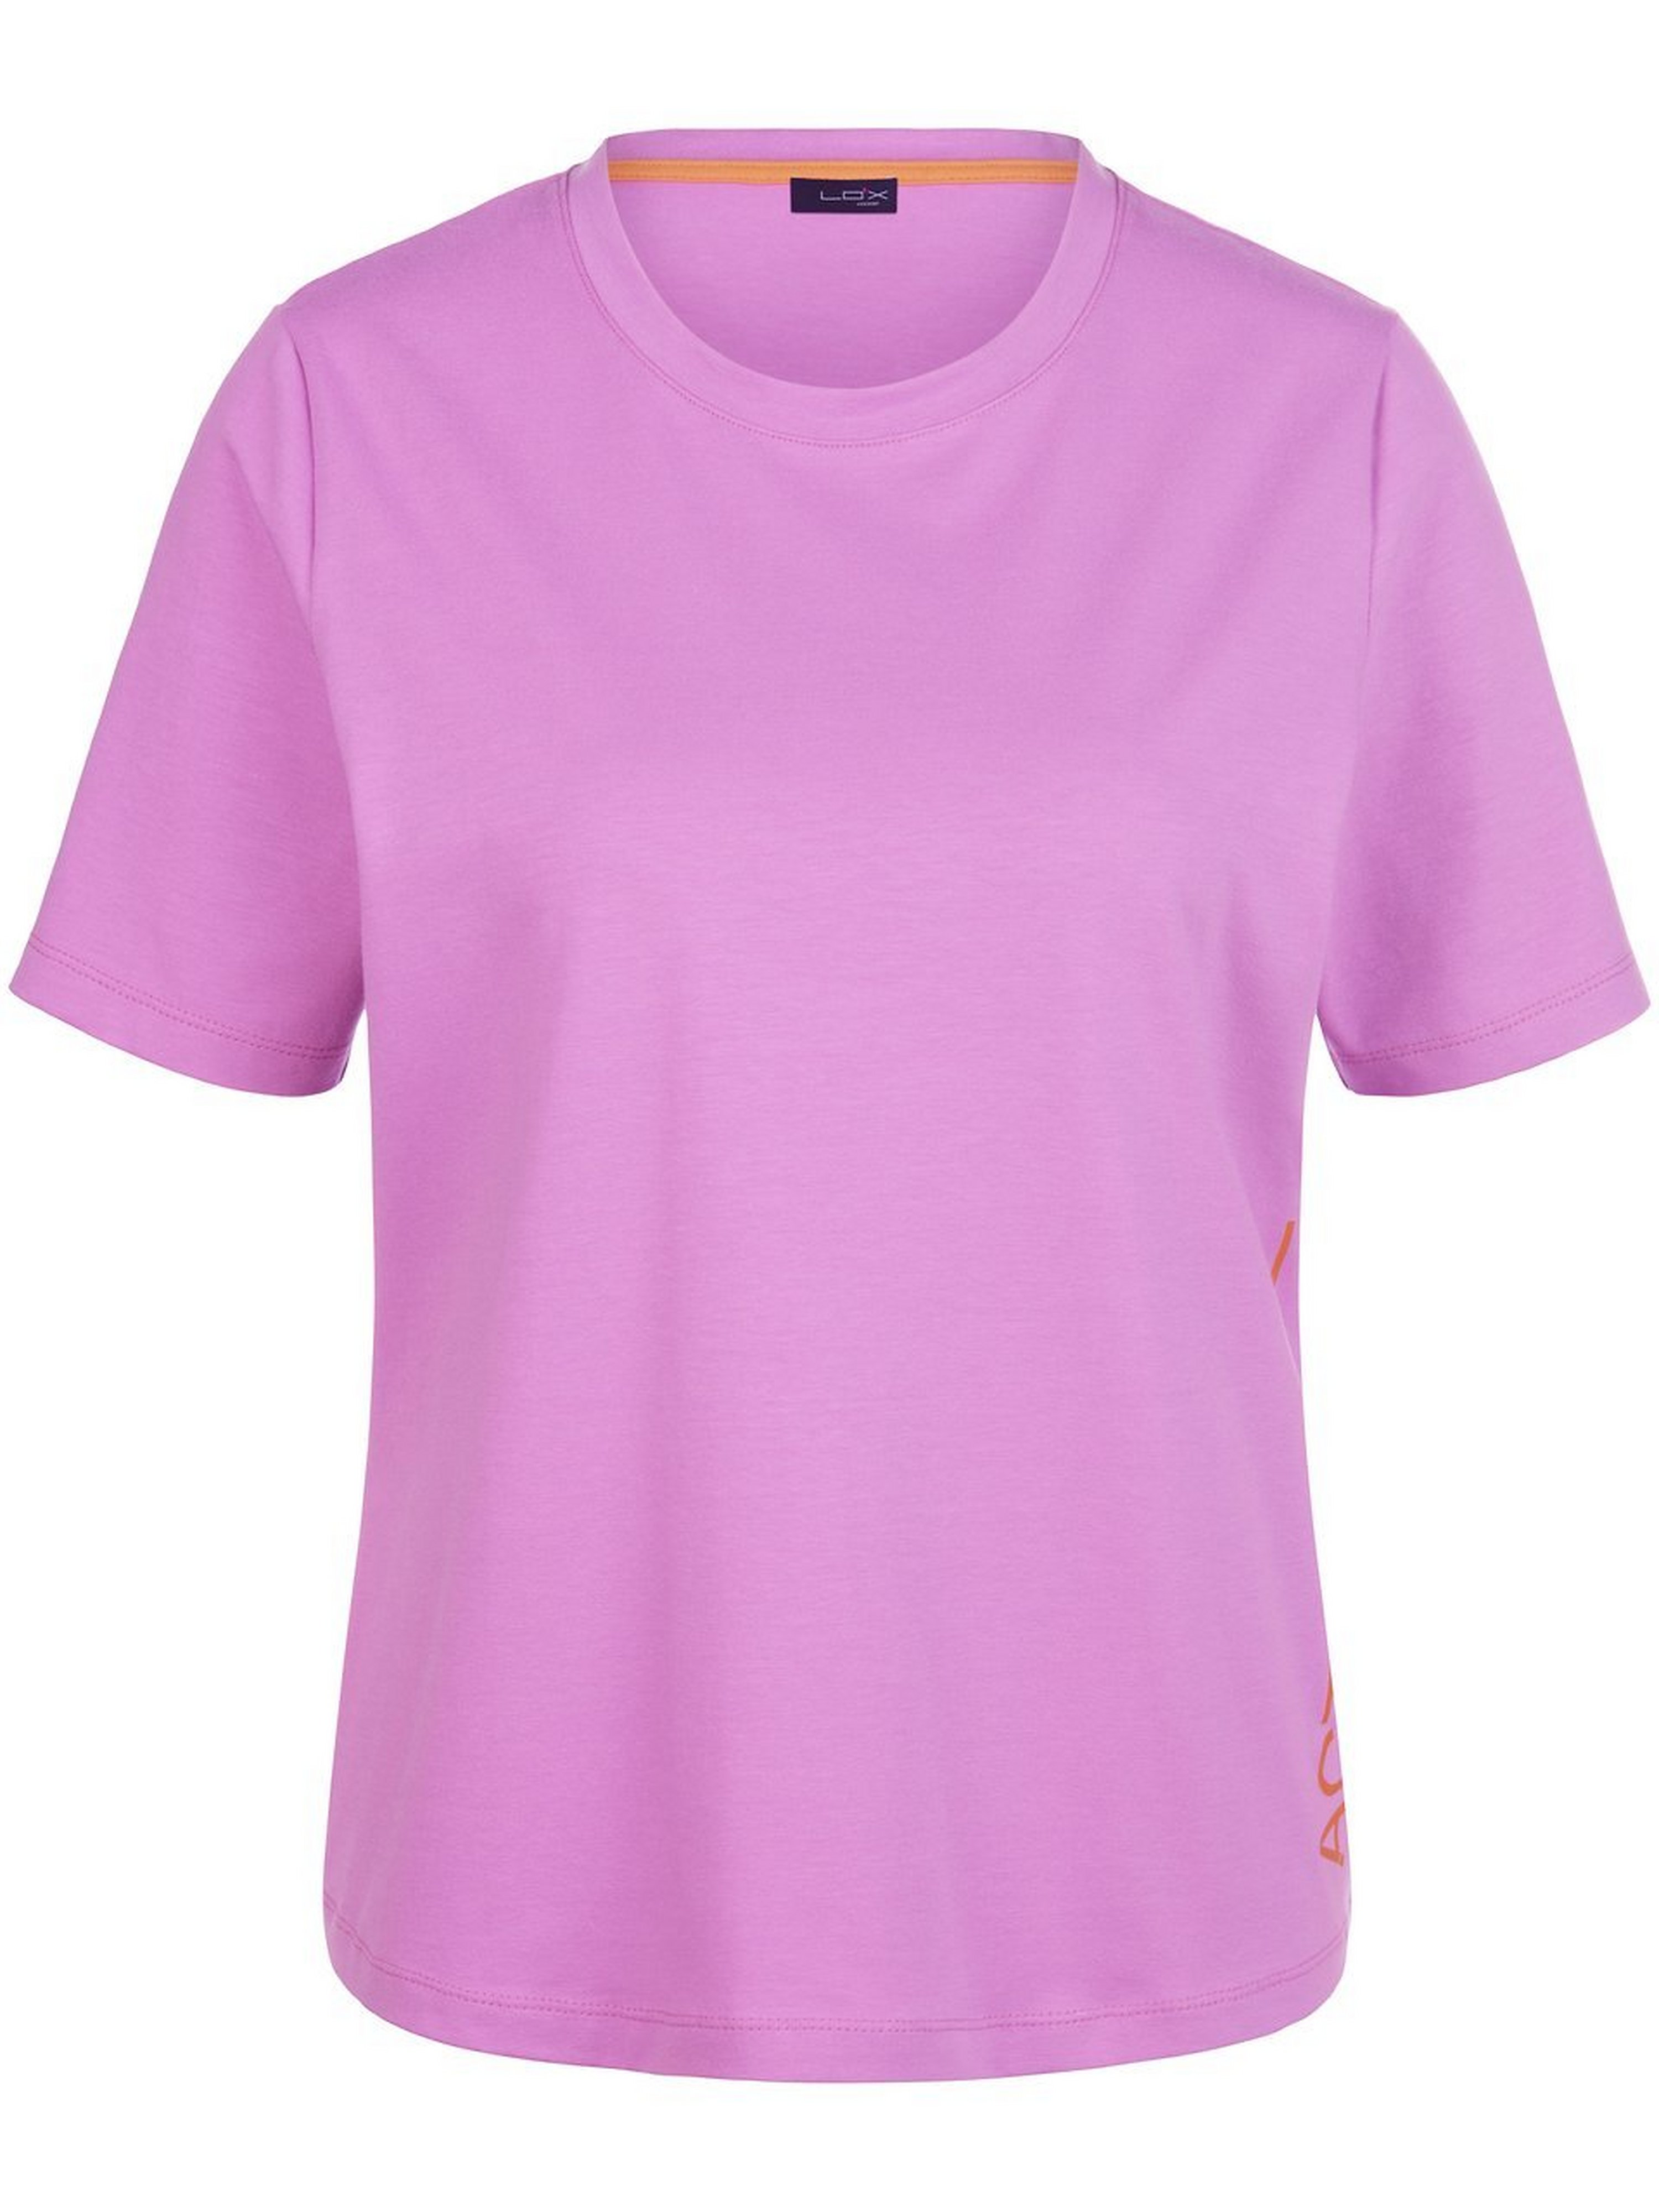 Le T-shirt manches courtes  Looxent fuchsia taille 46